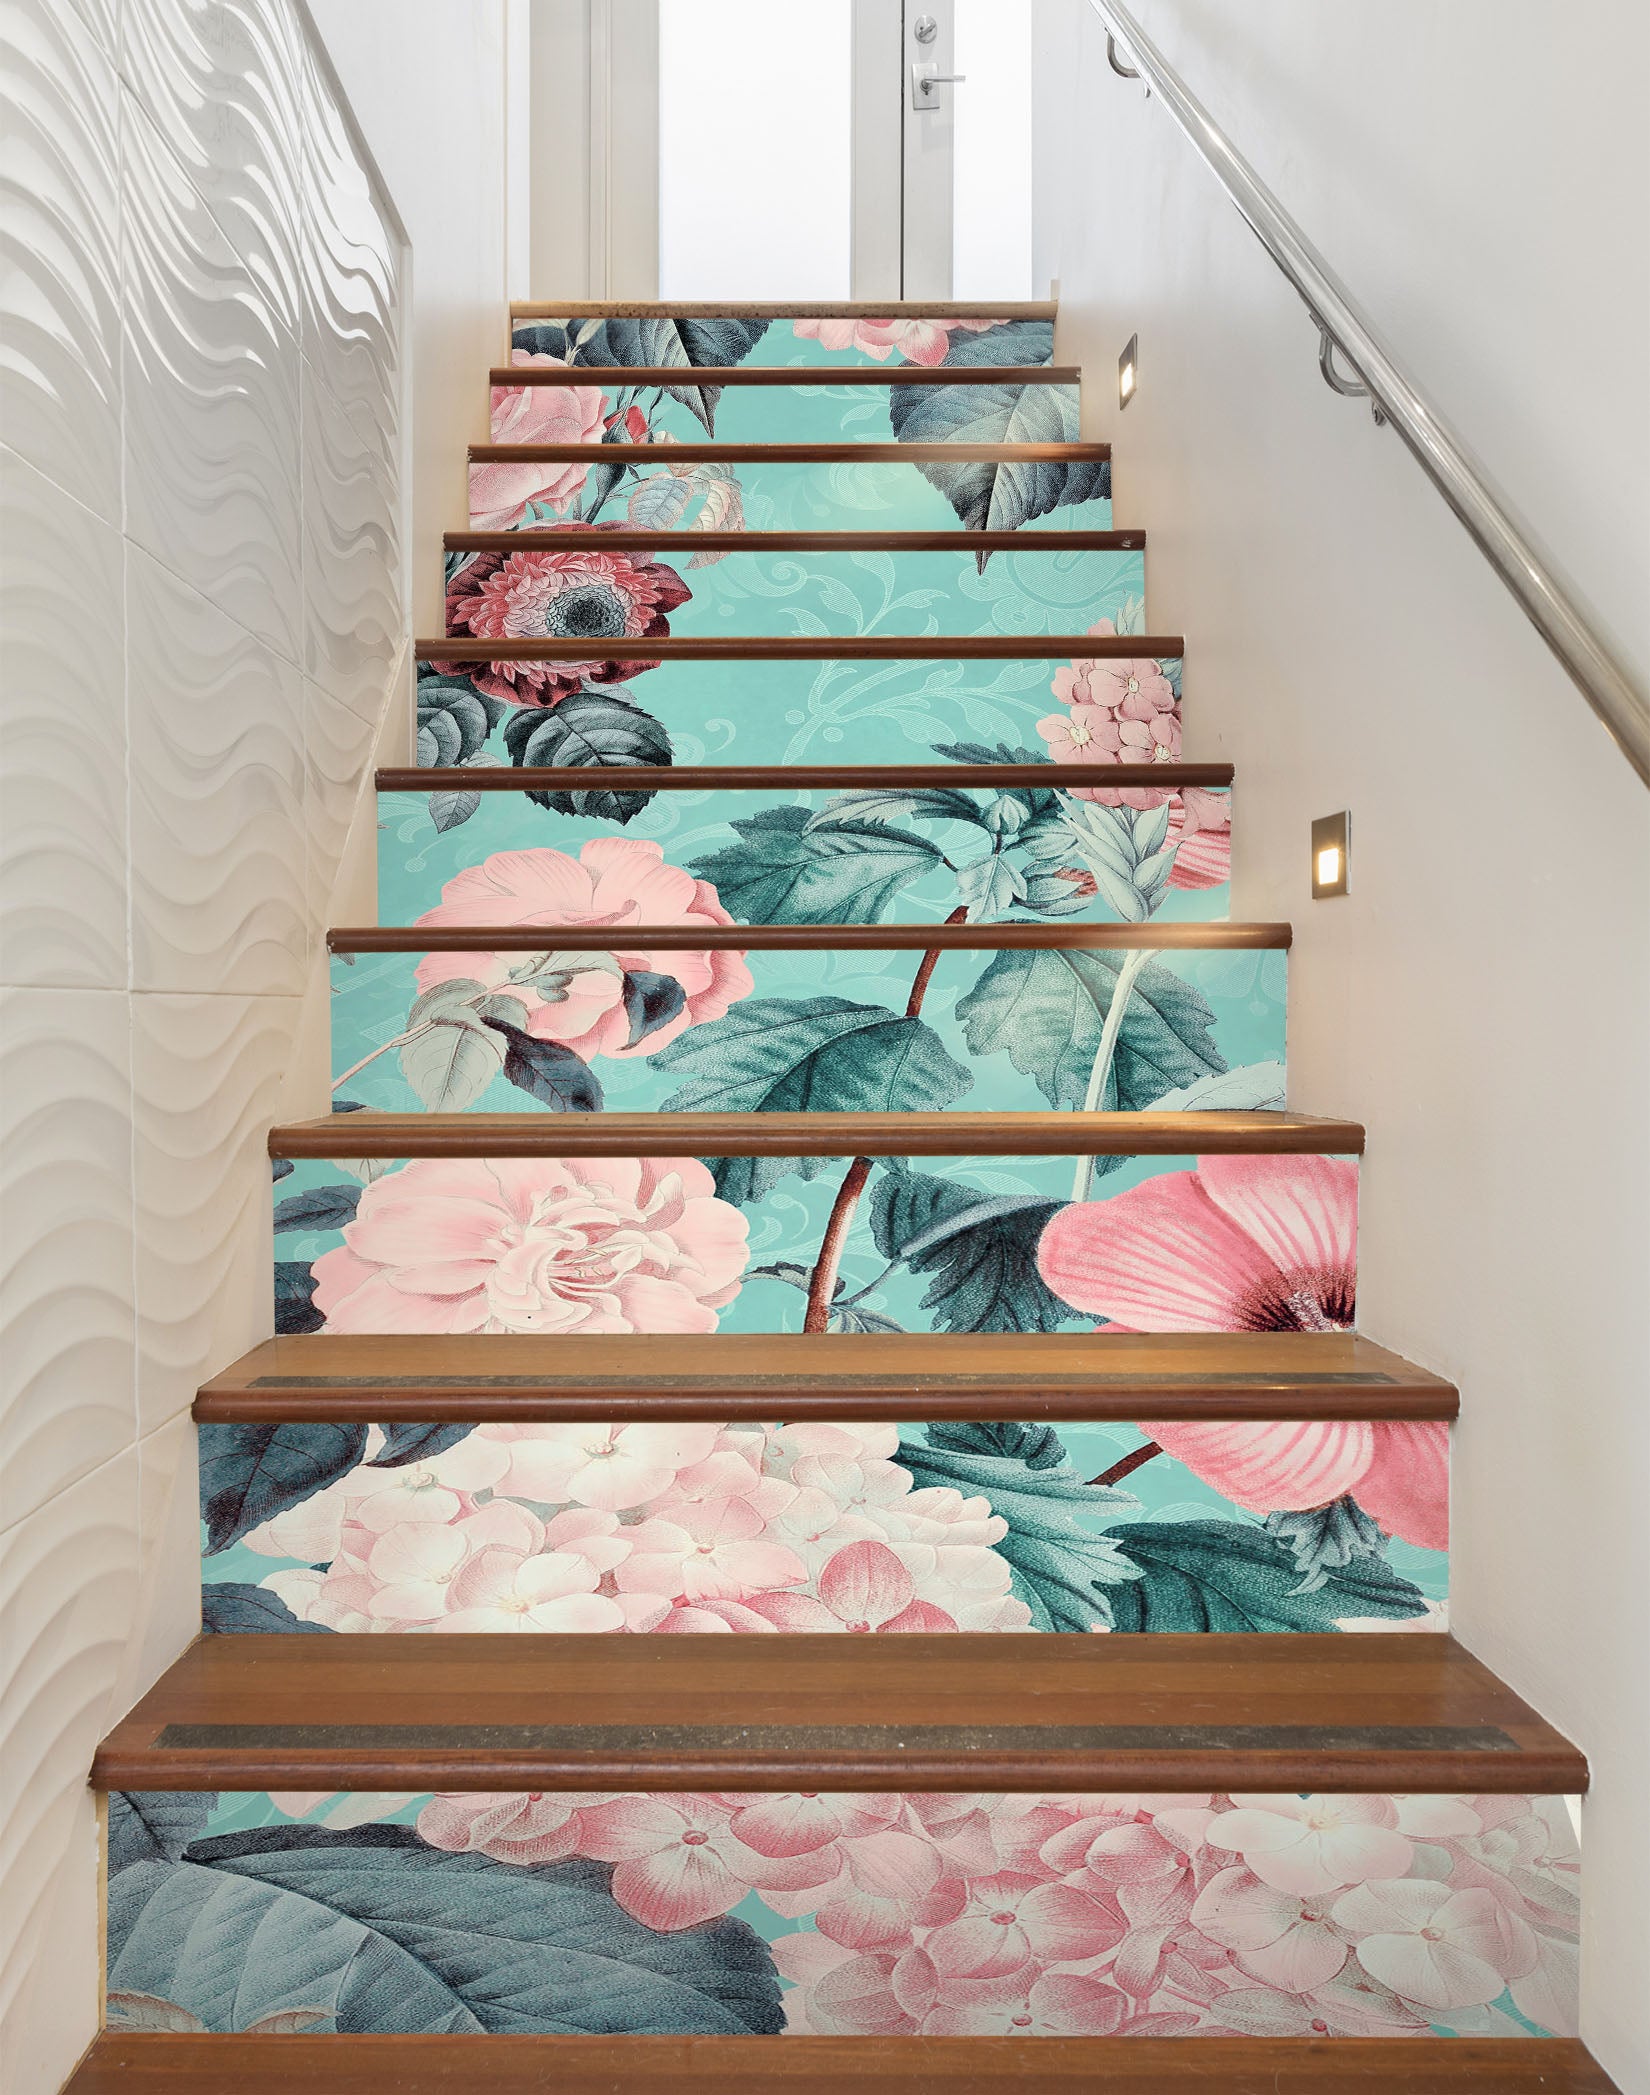 3D Flower Bush Pink 109222 Andrea Haase Stair Risers